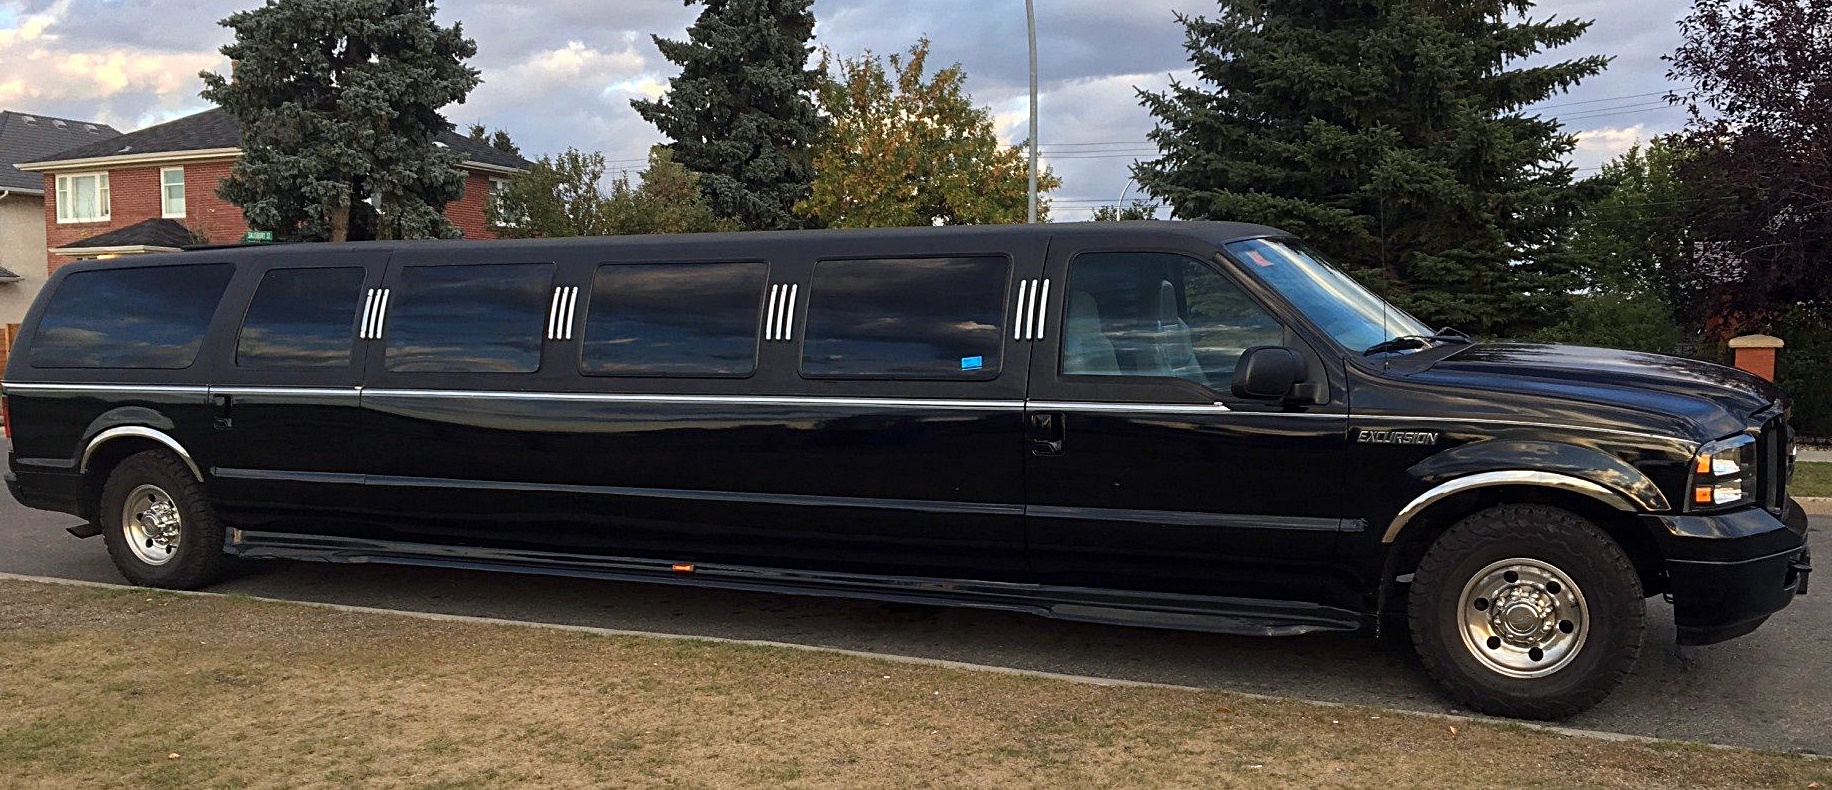 Chemung County Limo Service